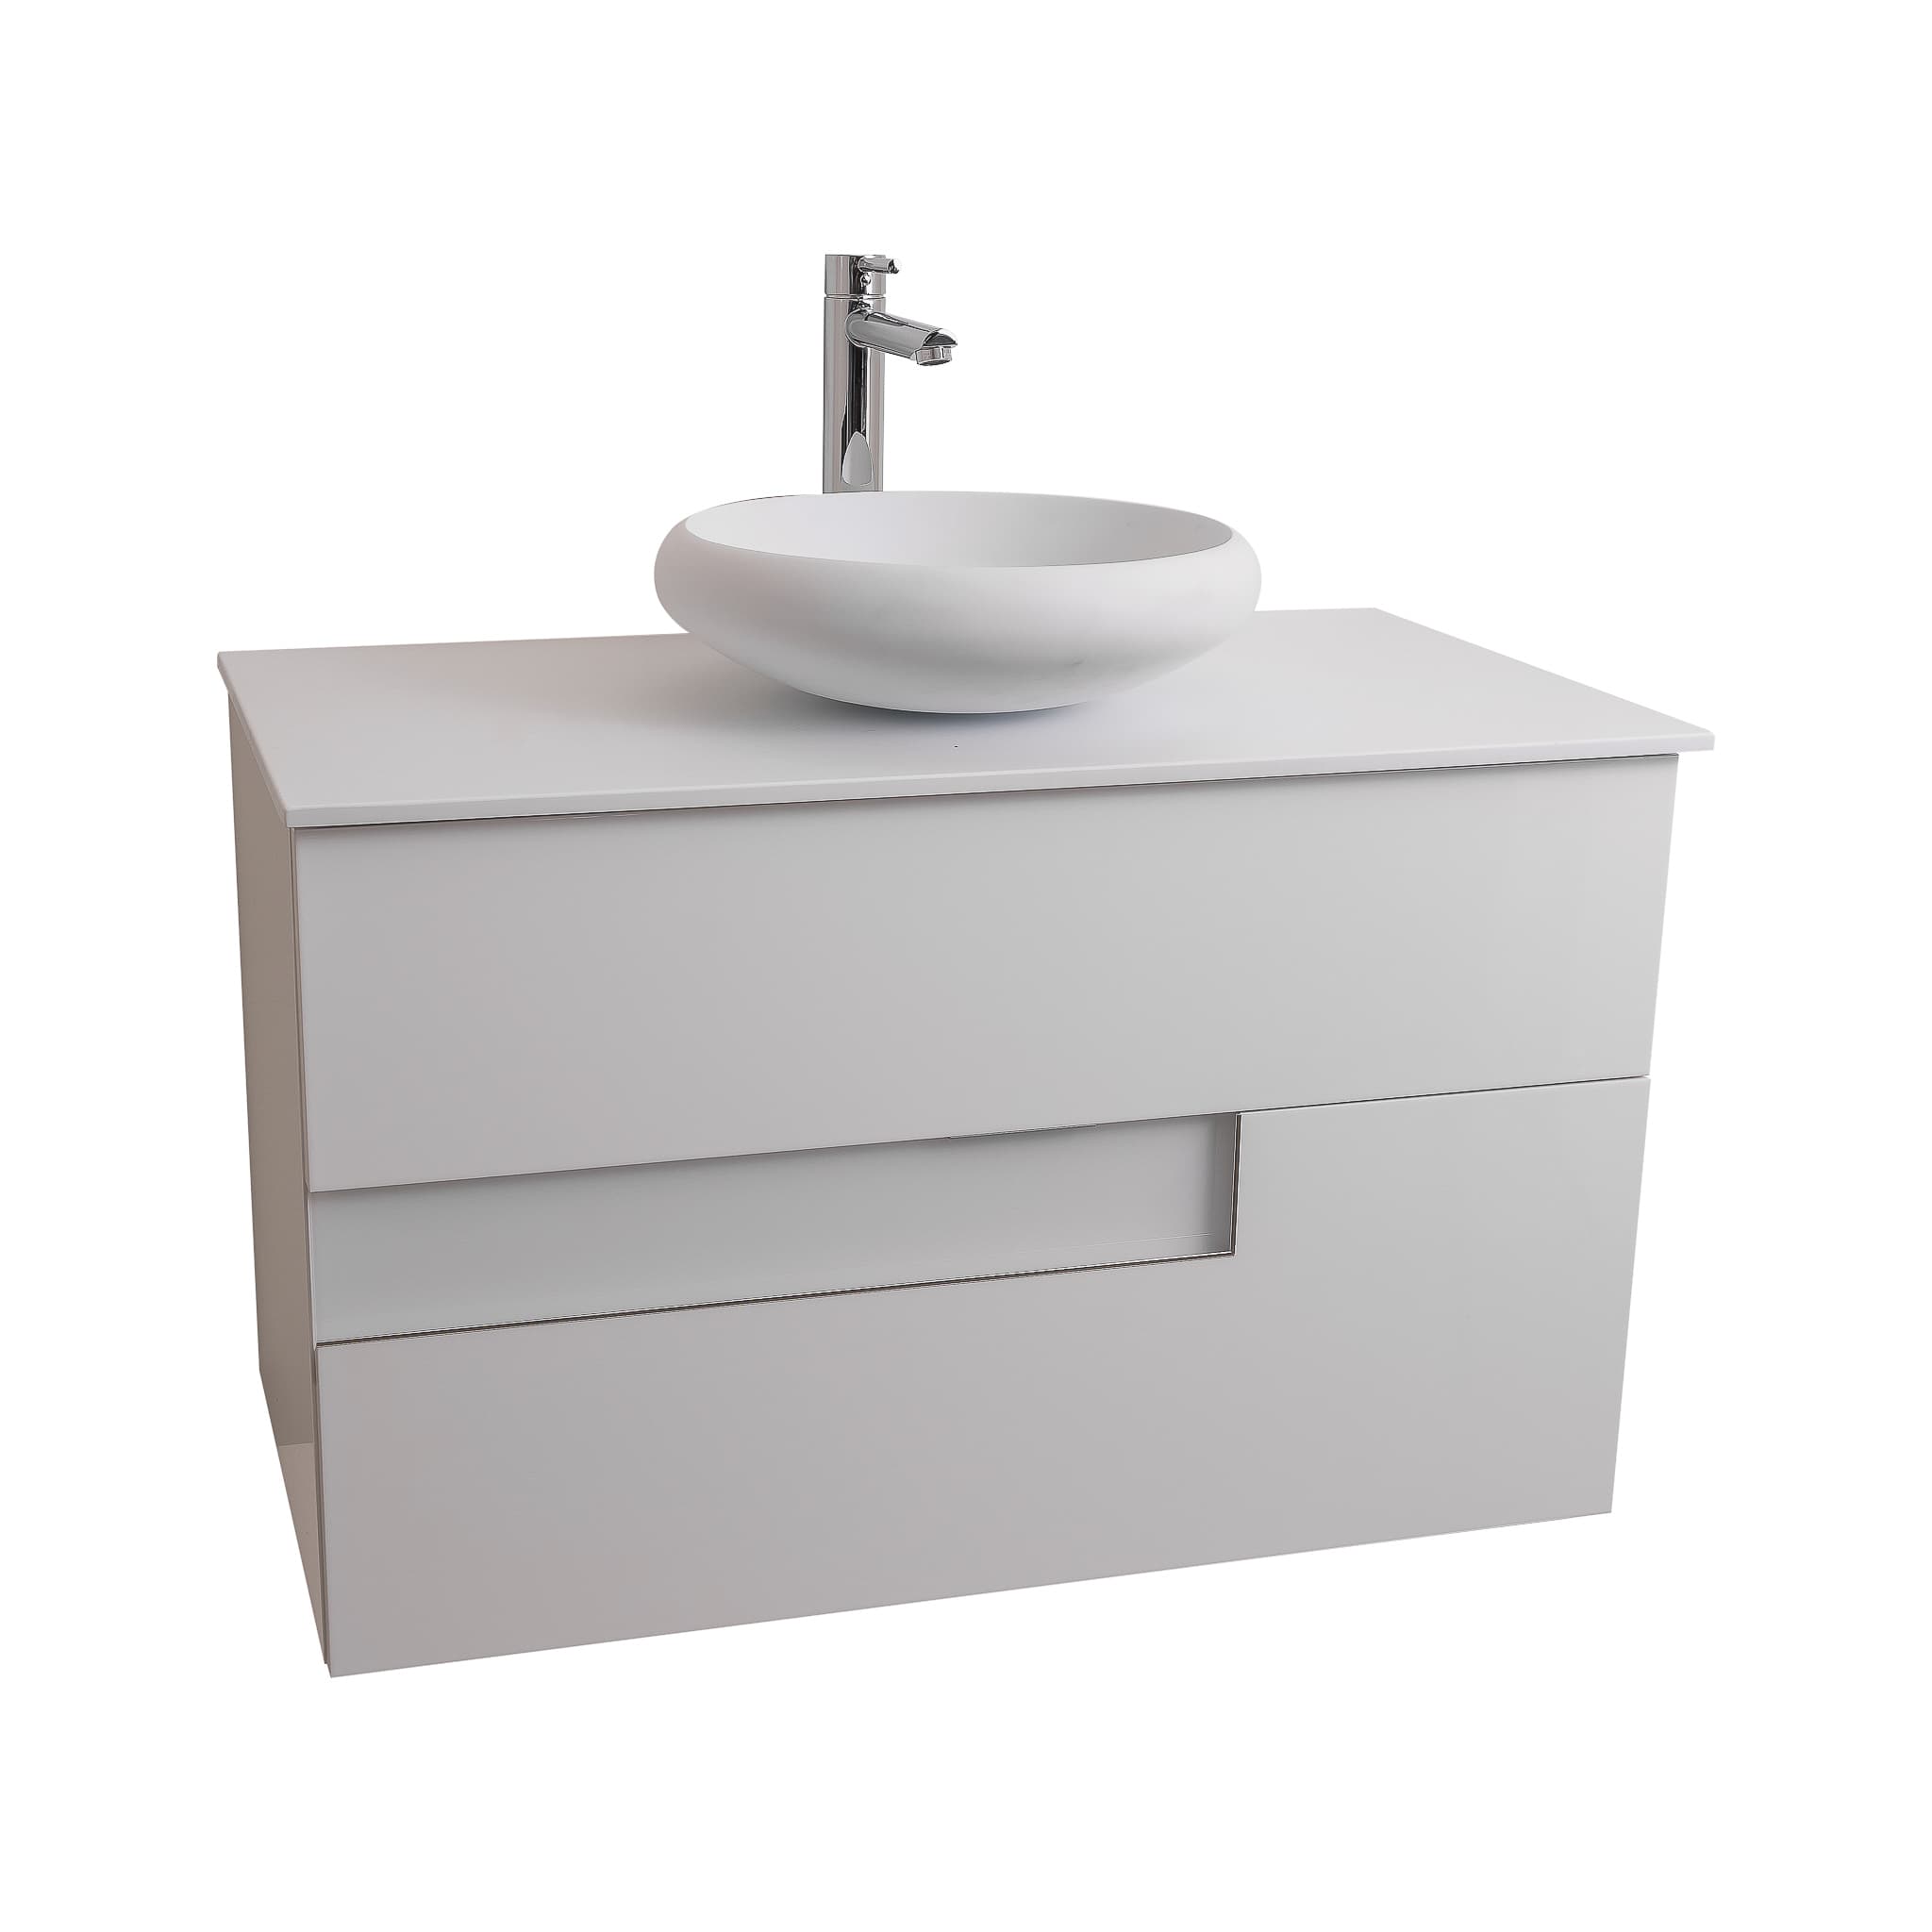 Vision 39.5 White High Gloss Cabinet, Solid Surface Flat White Counter And Round Solid Surface White Basin 1153, Wall Mounted Modern Vanity Set